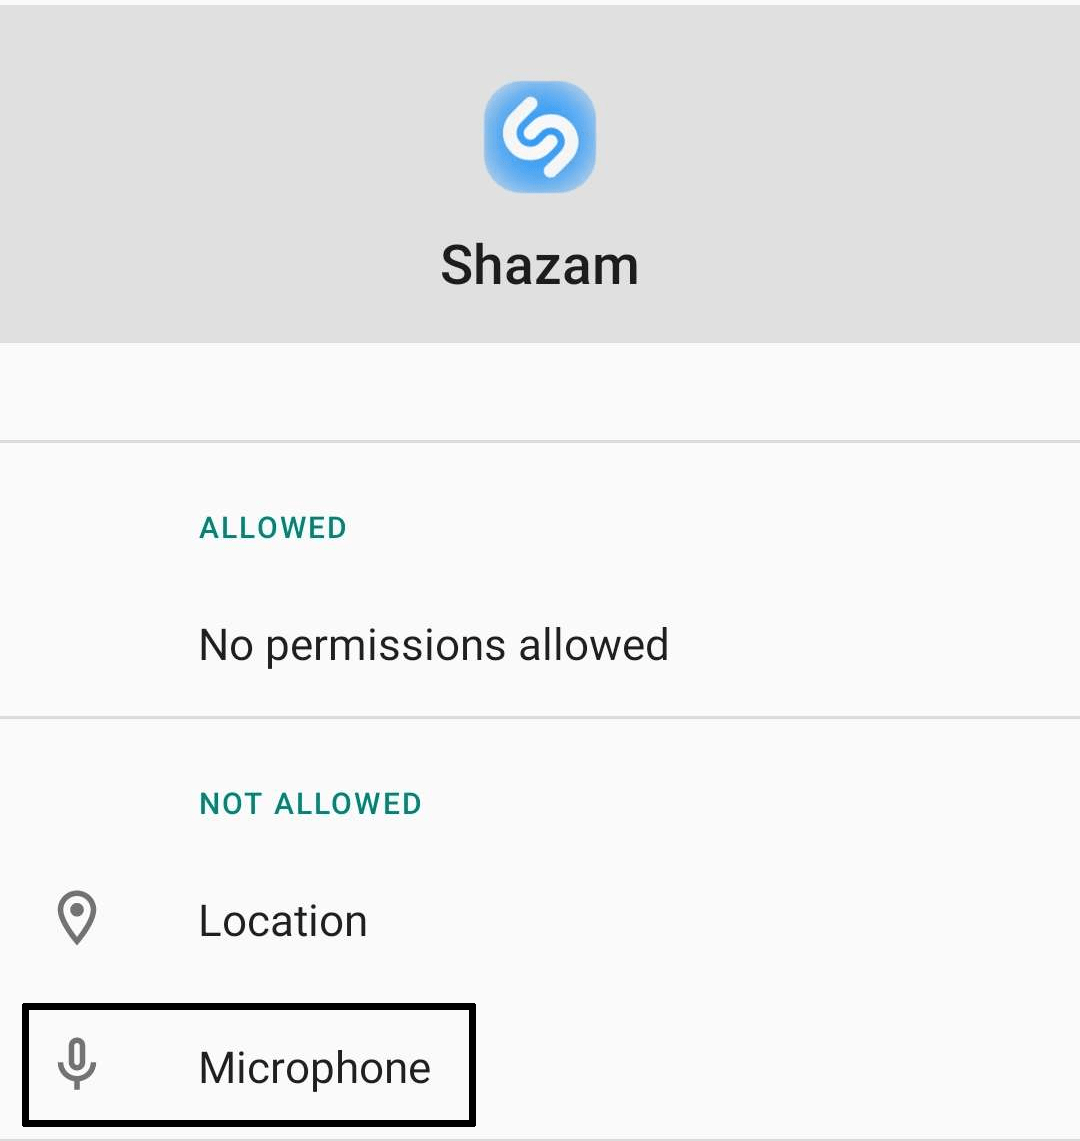 Give microphone permission or access to the Shazam app on Android through system settings to fix Shazam music recognition not working, app issues and problems, and crashing on Android